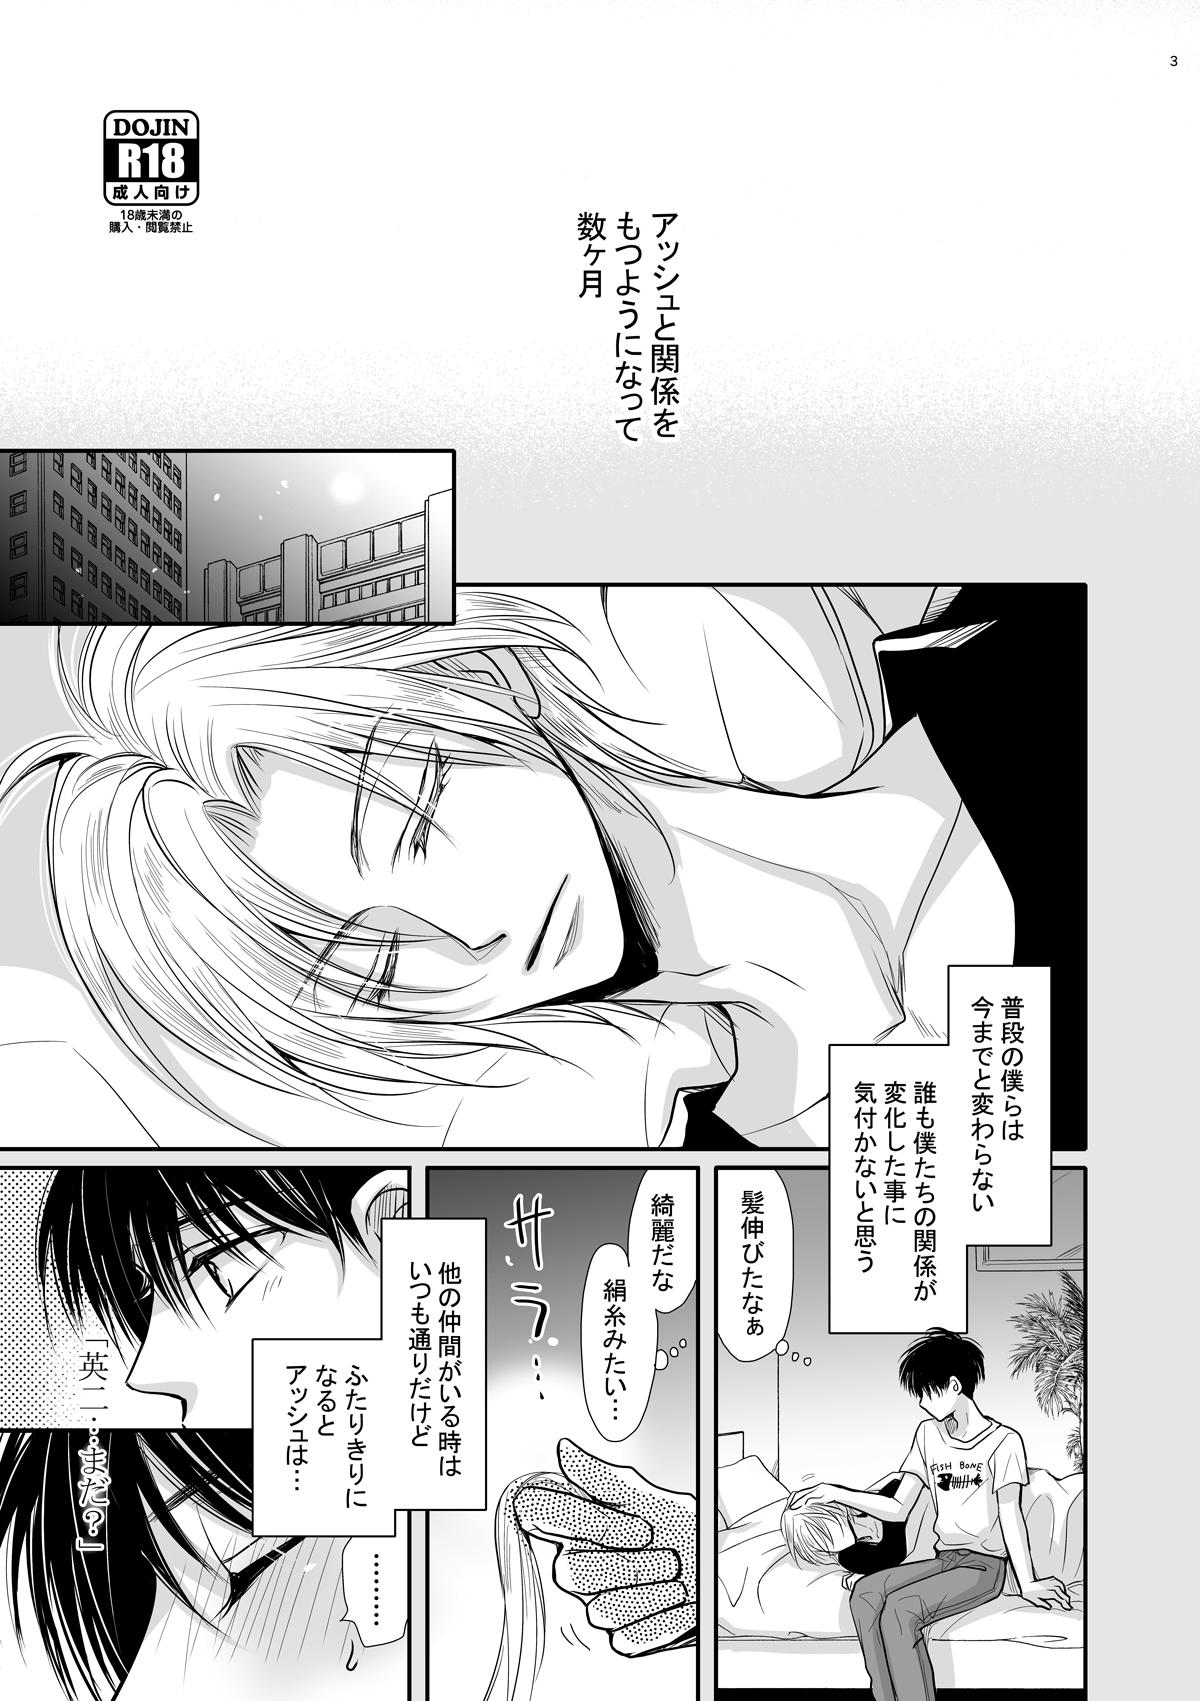 Ametur Porn Private Lesson - Banana fish Goldenshower - Page 2